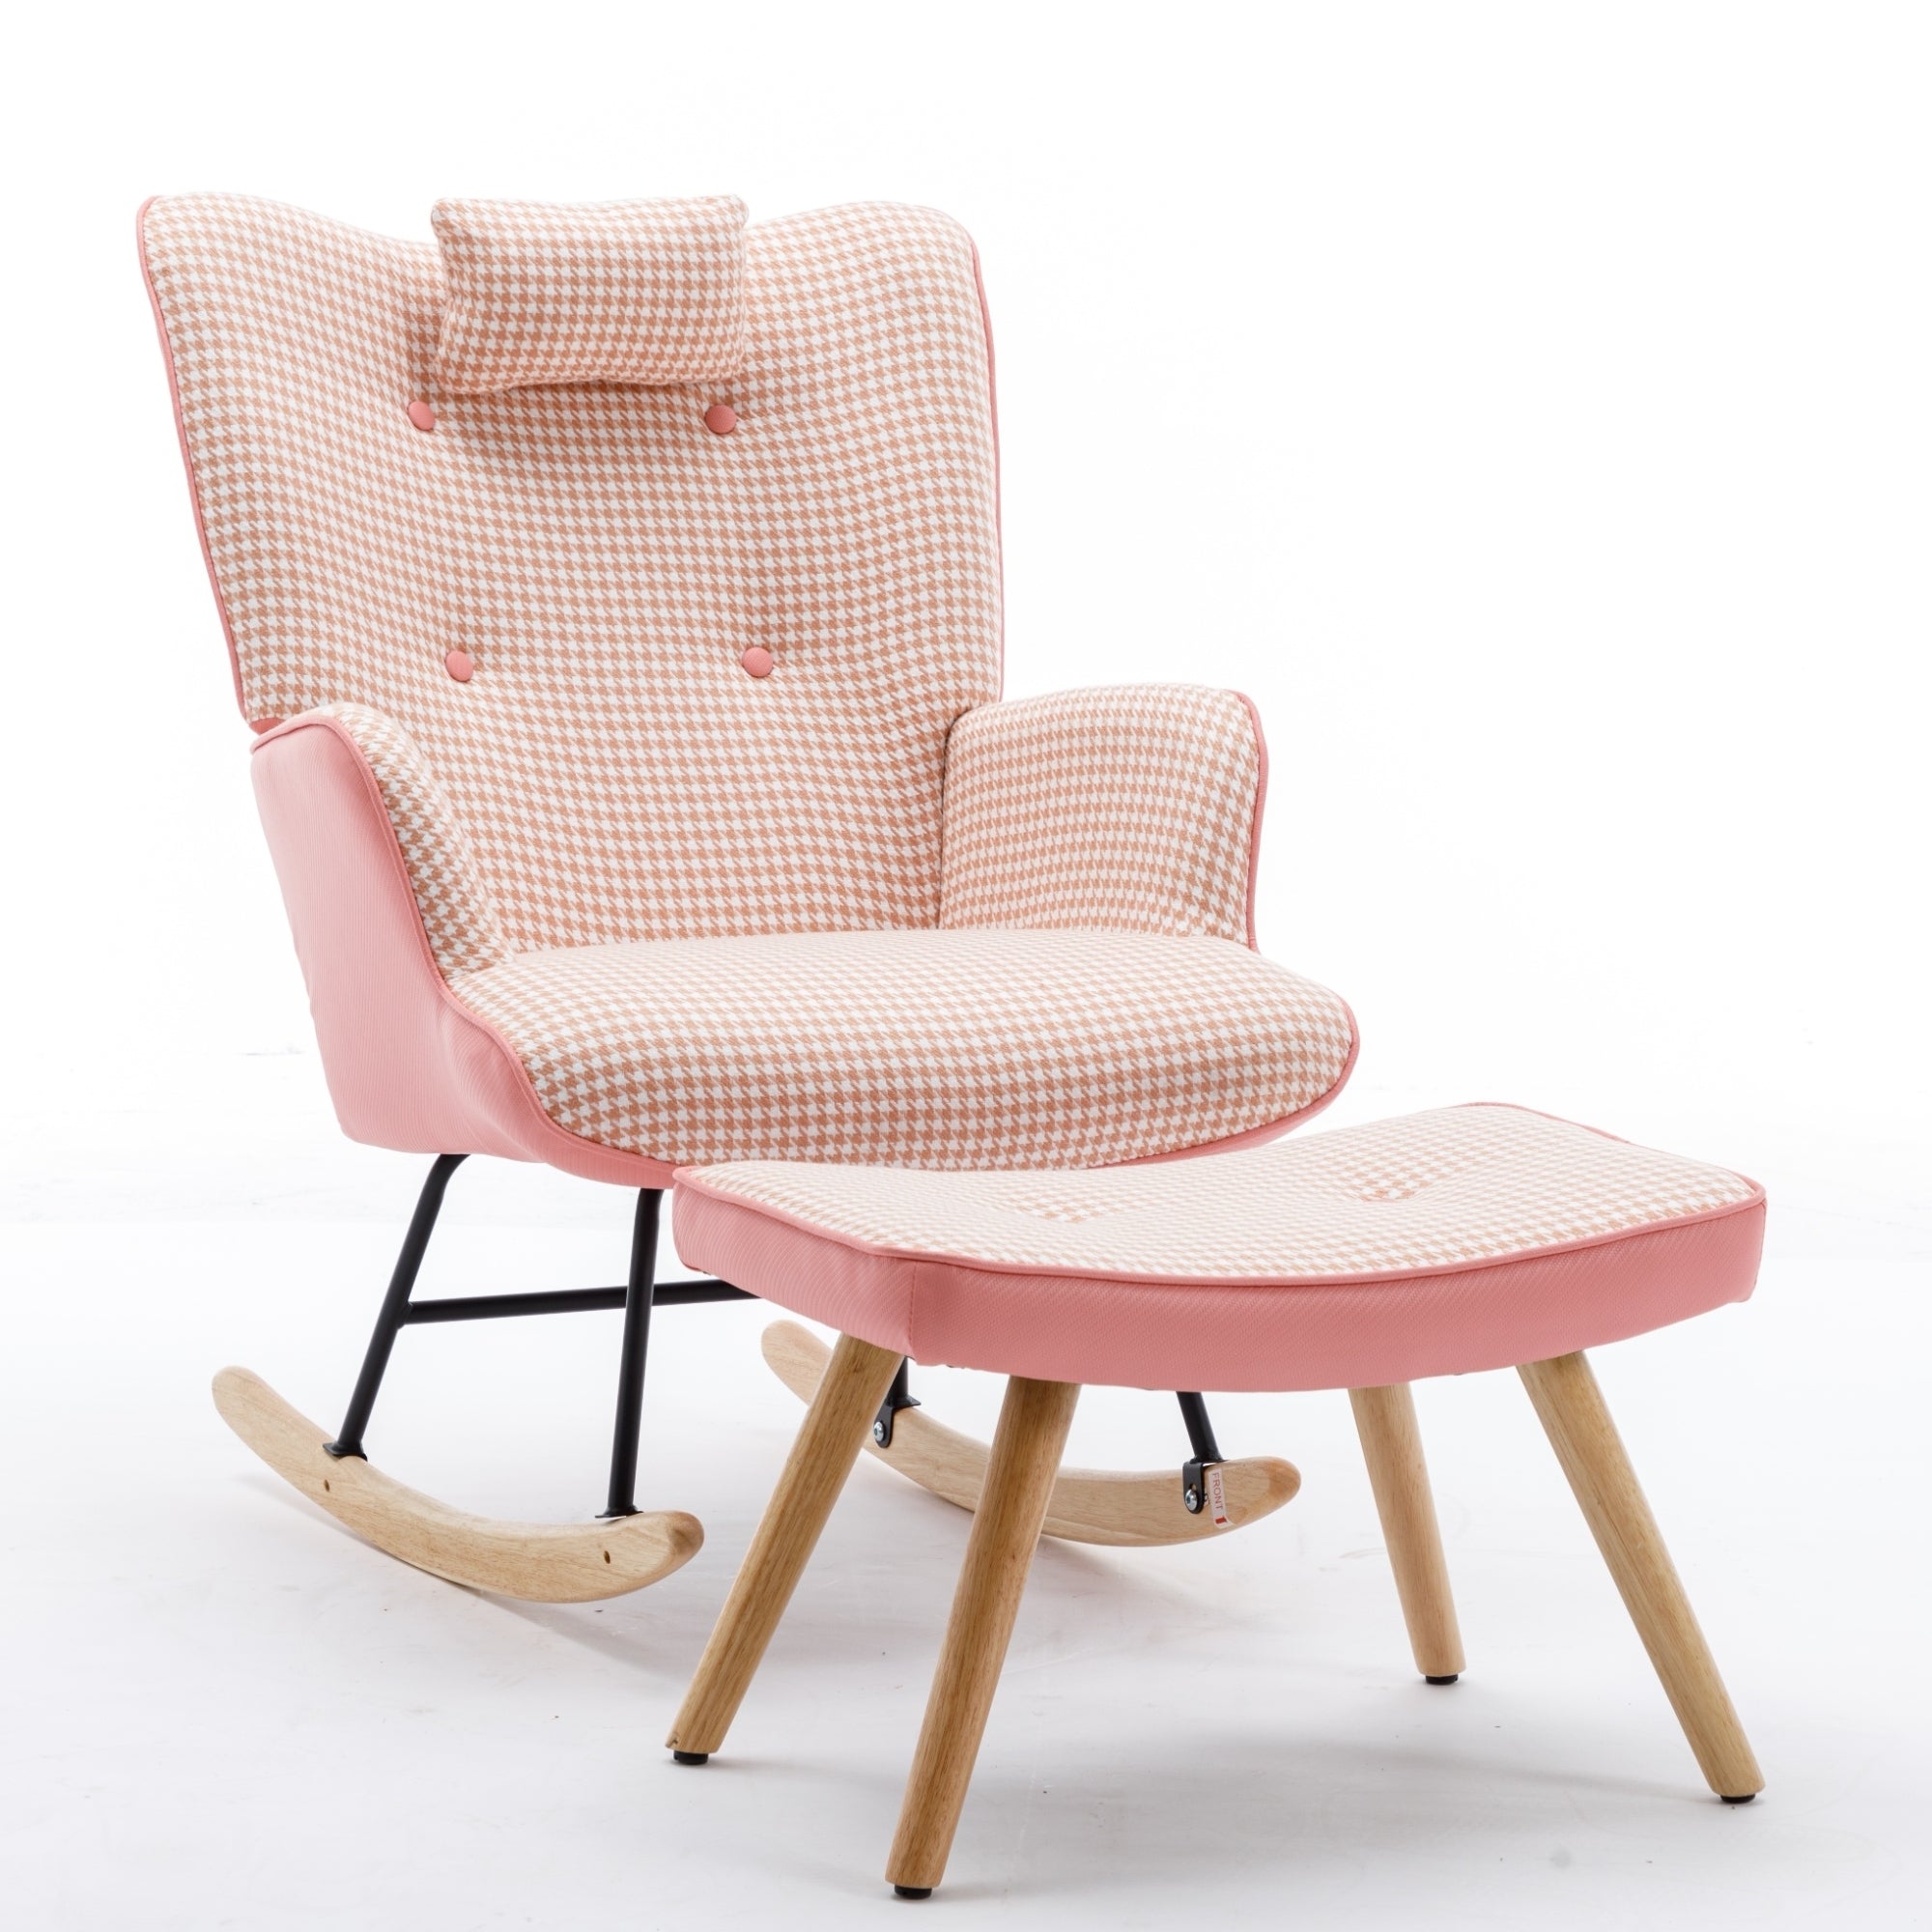 35.5--Wingback-Glider-Rocker-with--Solid-Wood-Base-Pink-Chairs-&-Seating